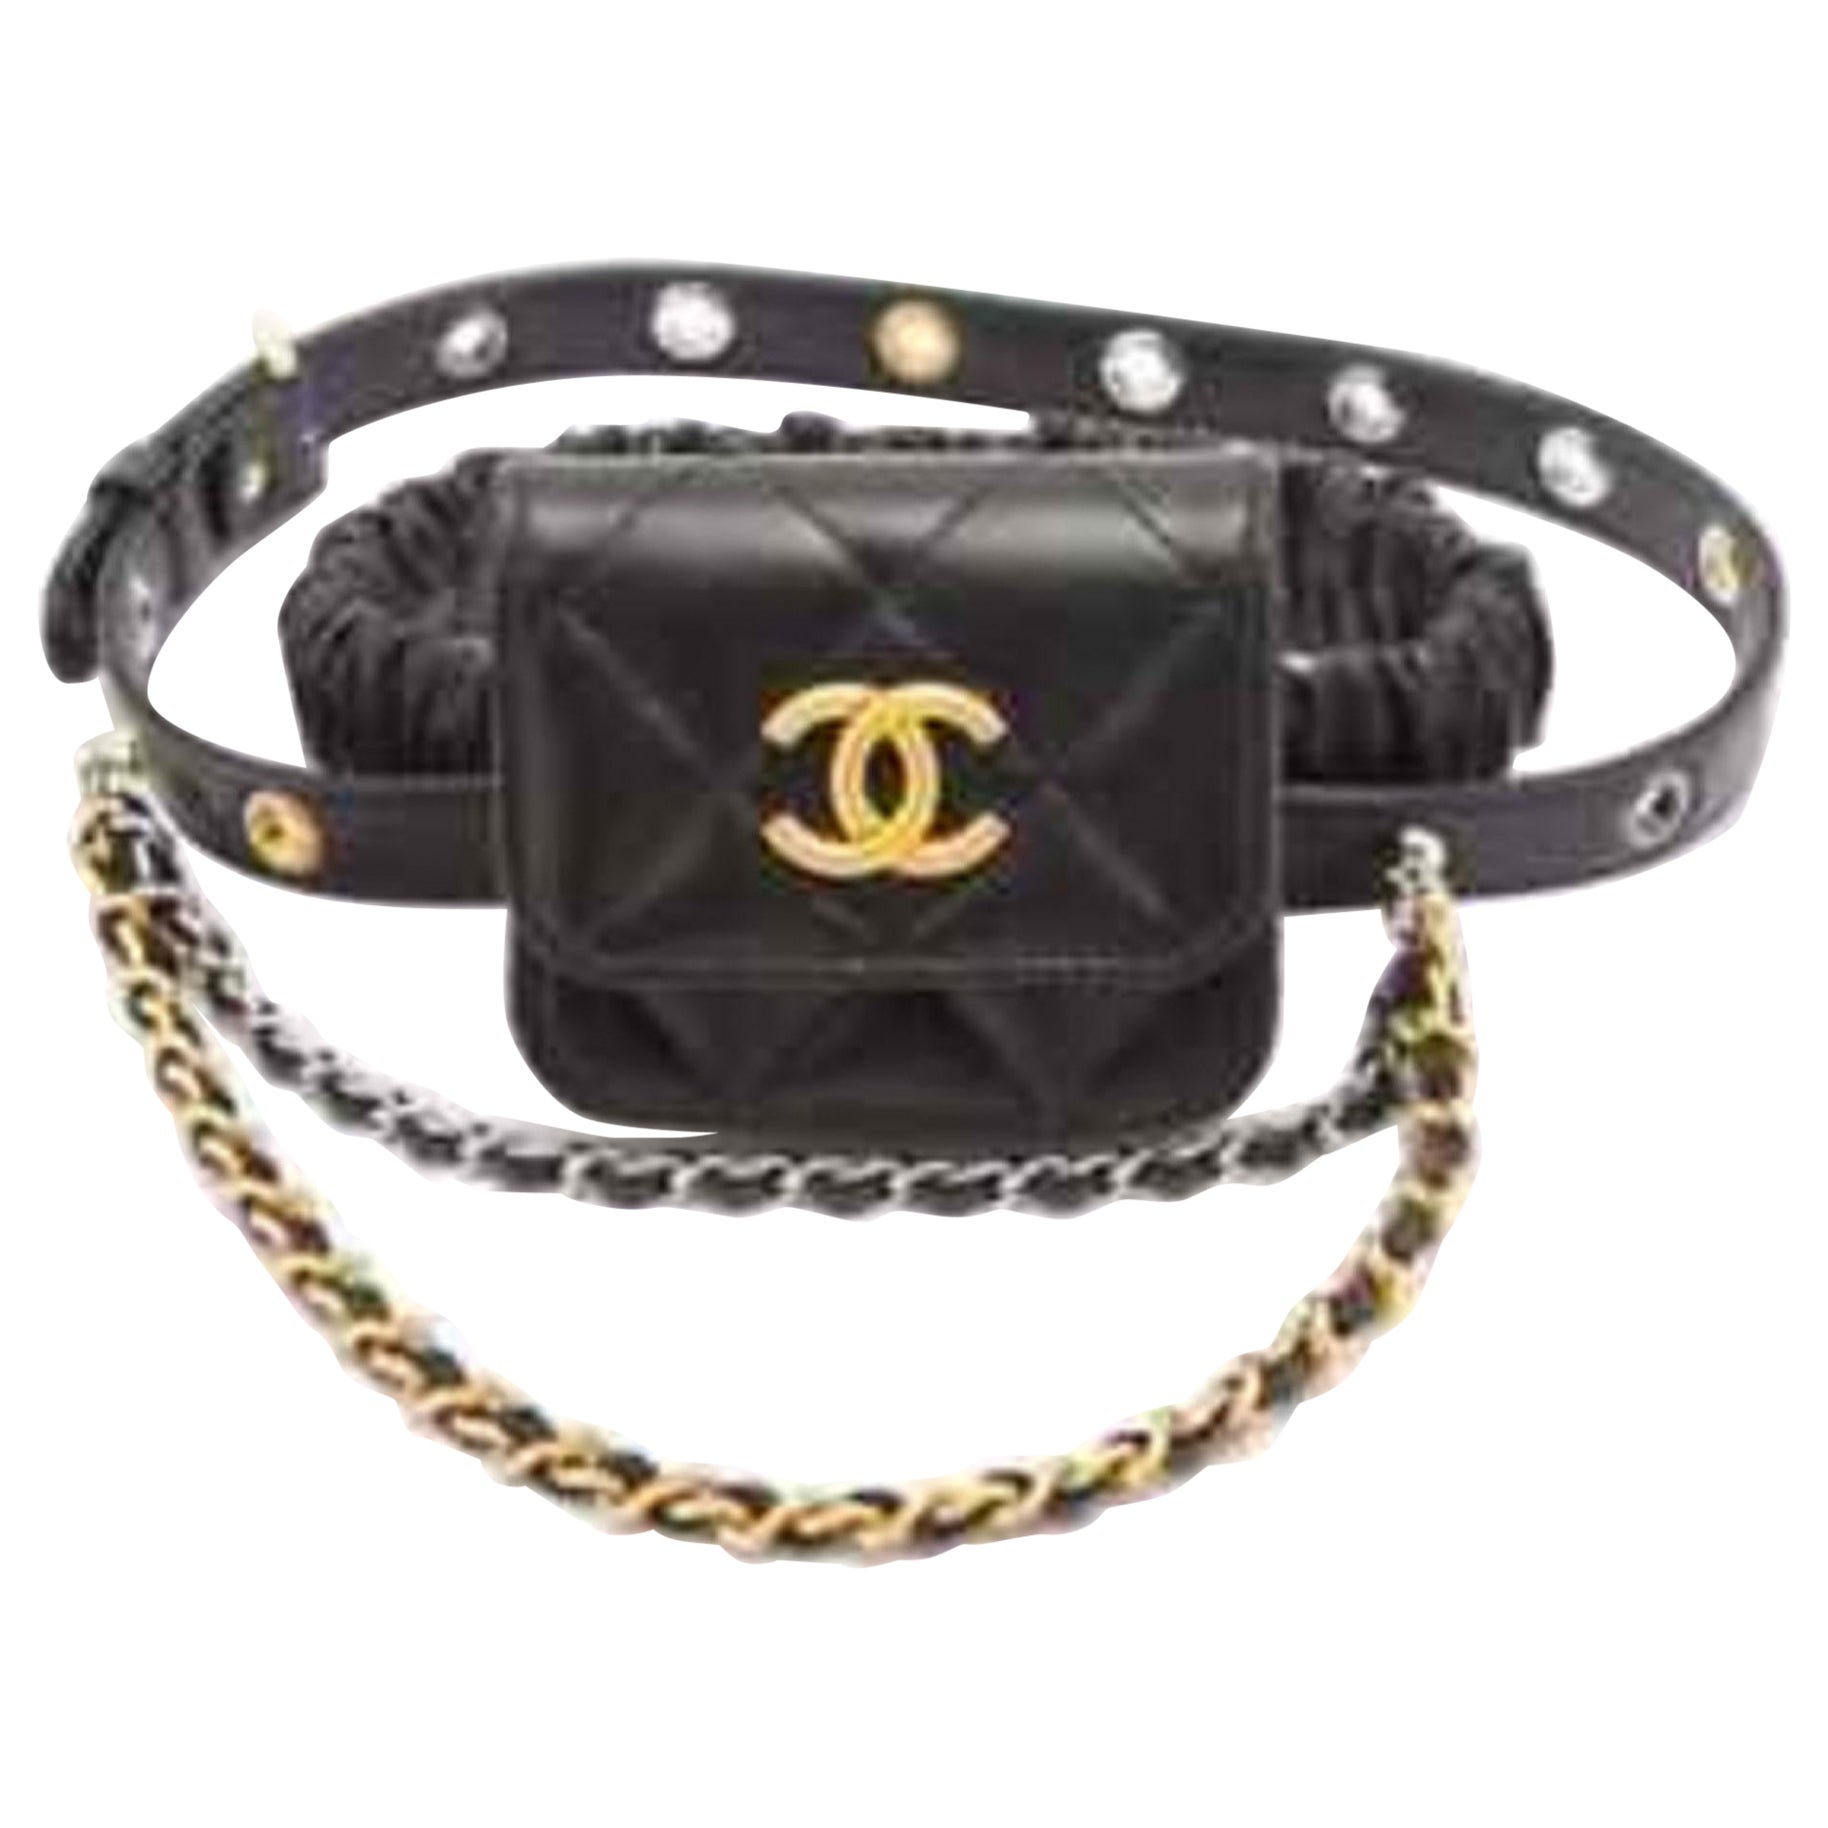 Chanel Thigh - 15 For Sale on 1stDibs  chanel thighs, chanel thigh bag,  chanel thigh purse